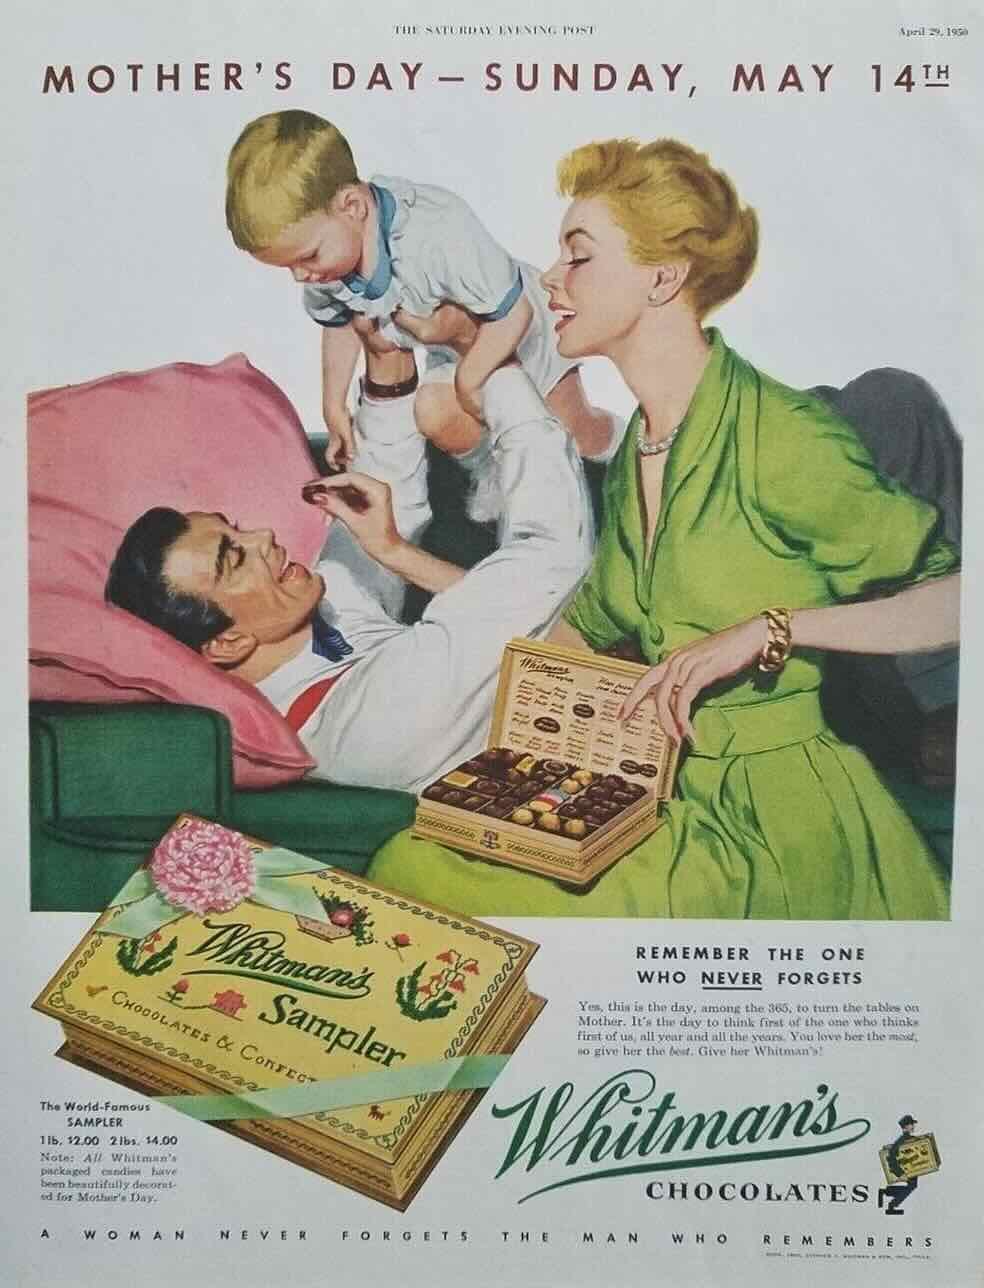 Mother’s Day advertisement, Whitman’s Chocolates, 1950